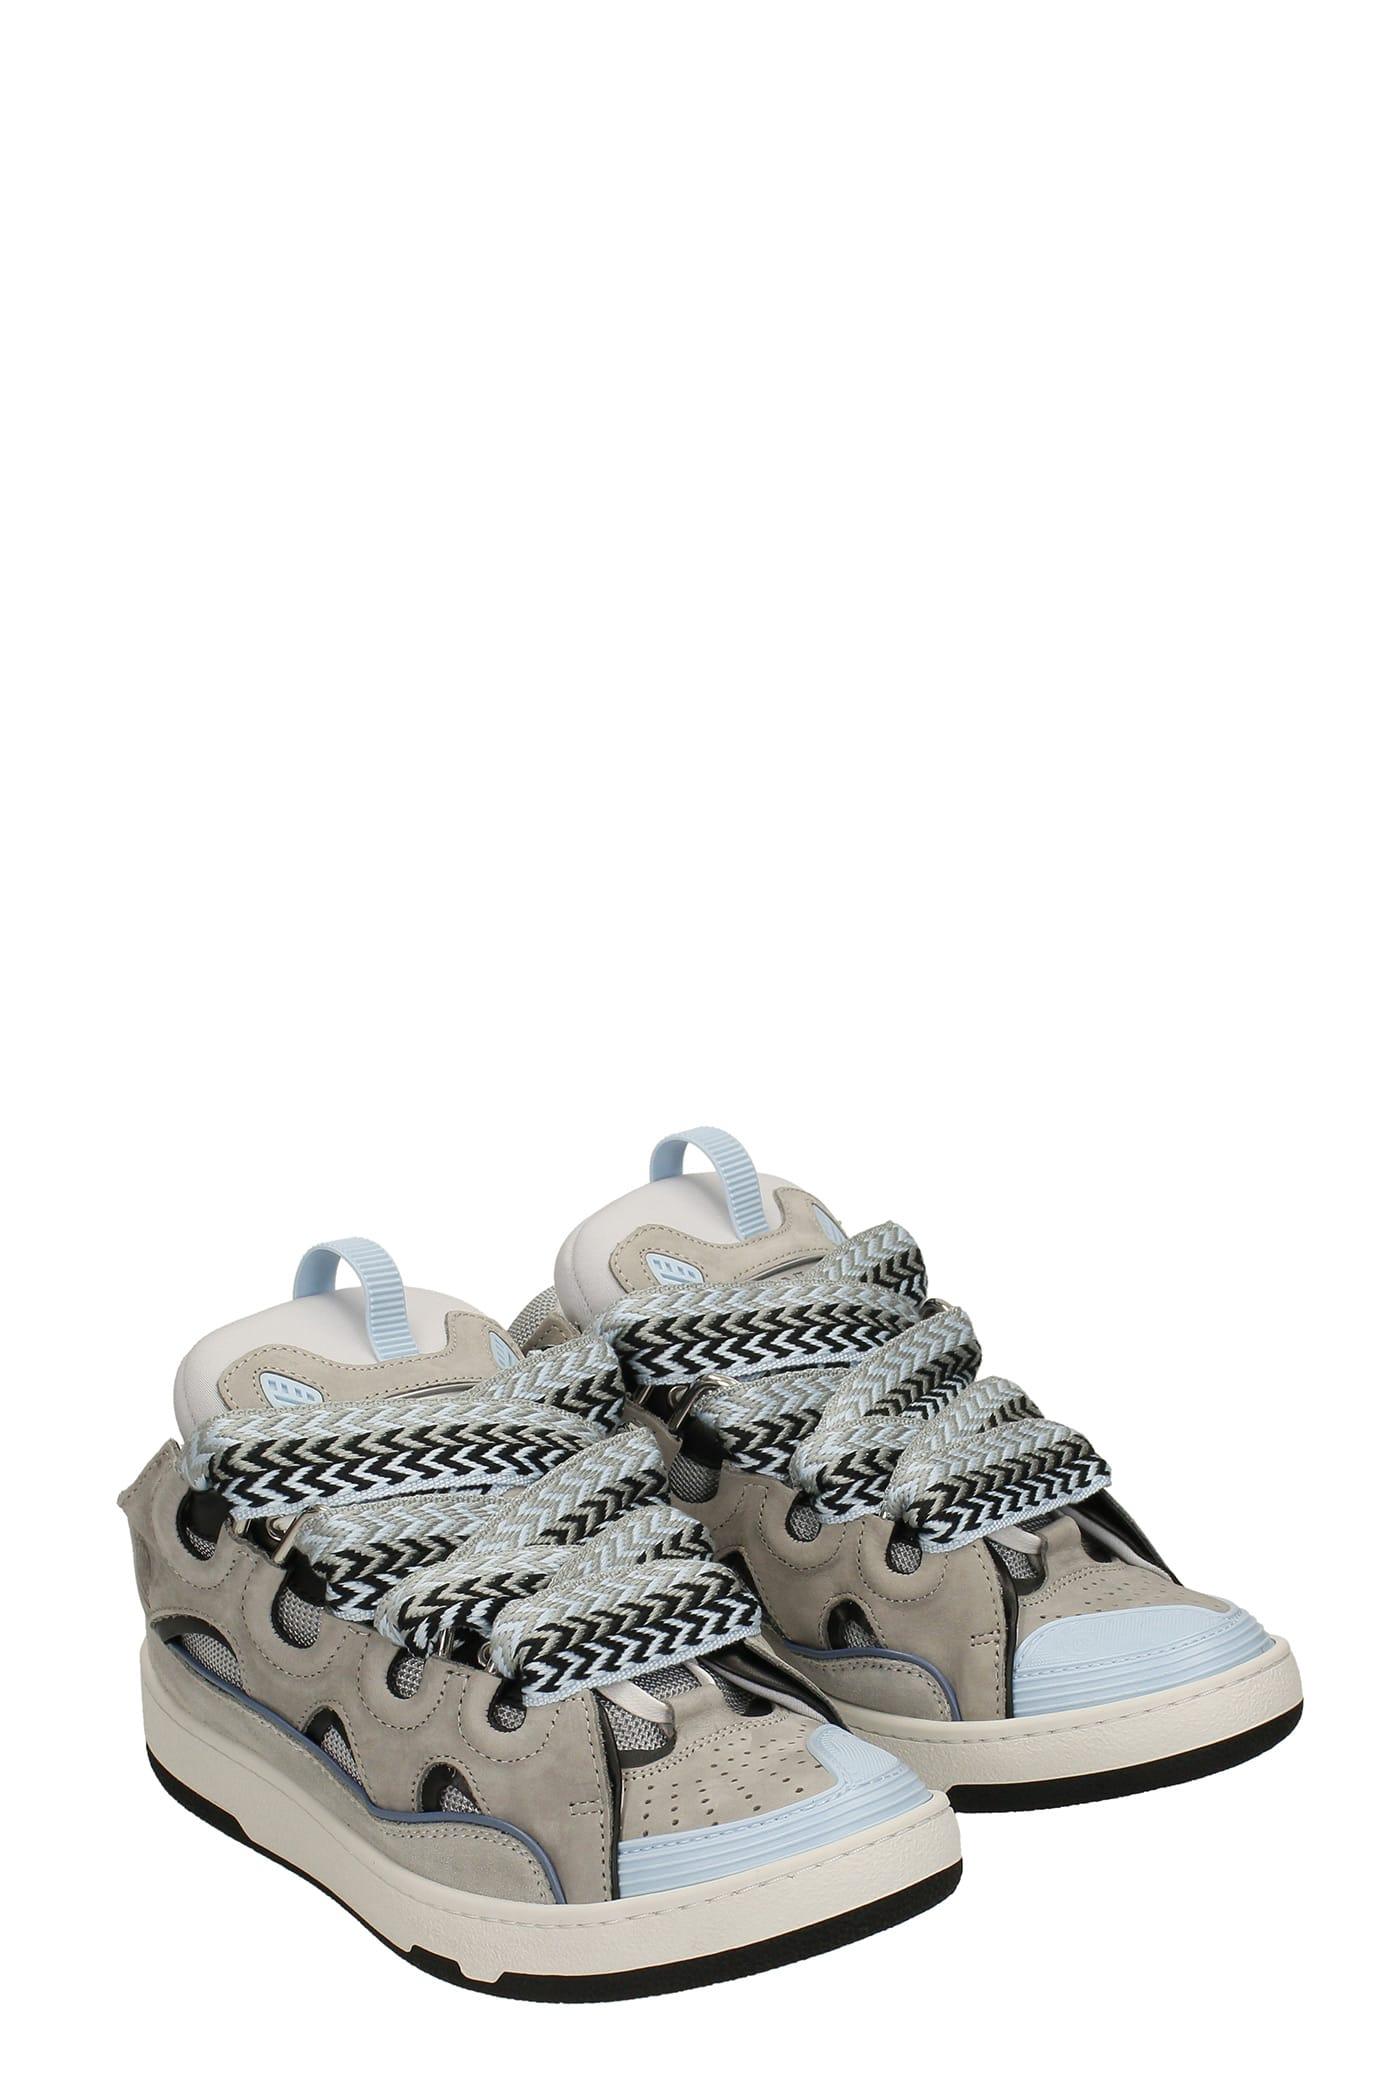 Lanvin Curb Sneakers In Suede And Leather in Gray for Men | Lyst